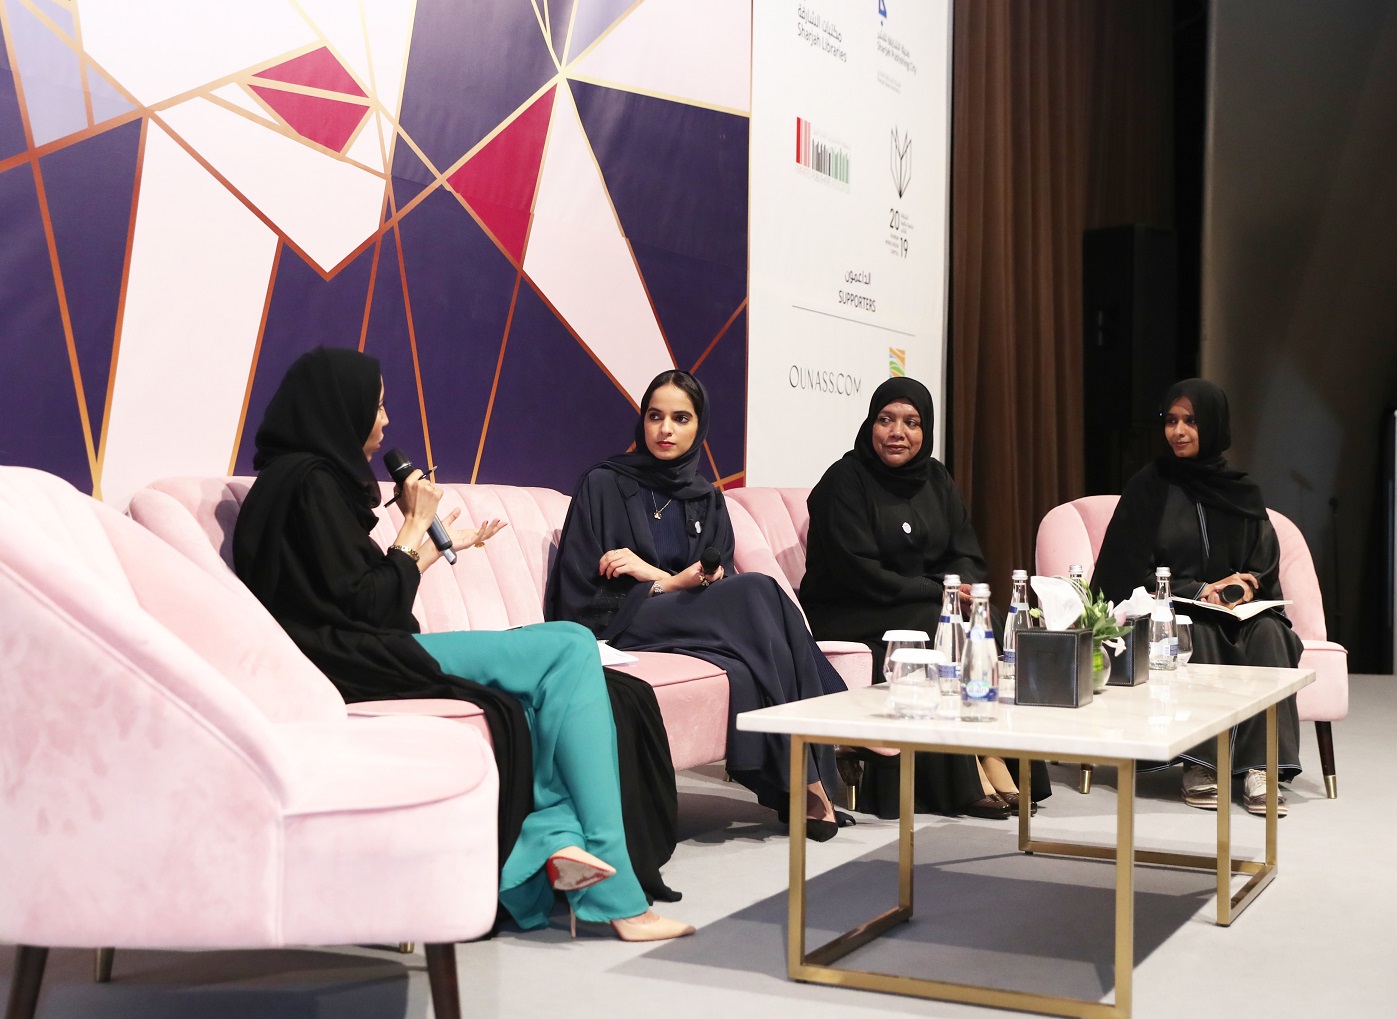 Bodour Al Qasimi: We aim to rewrite the rules of the publishing game; foster equality between genders making the industry balanced & fair